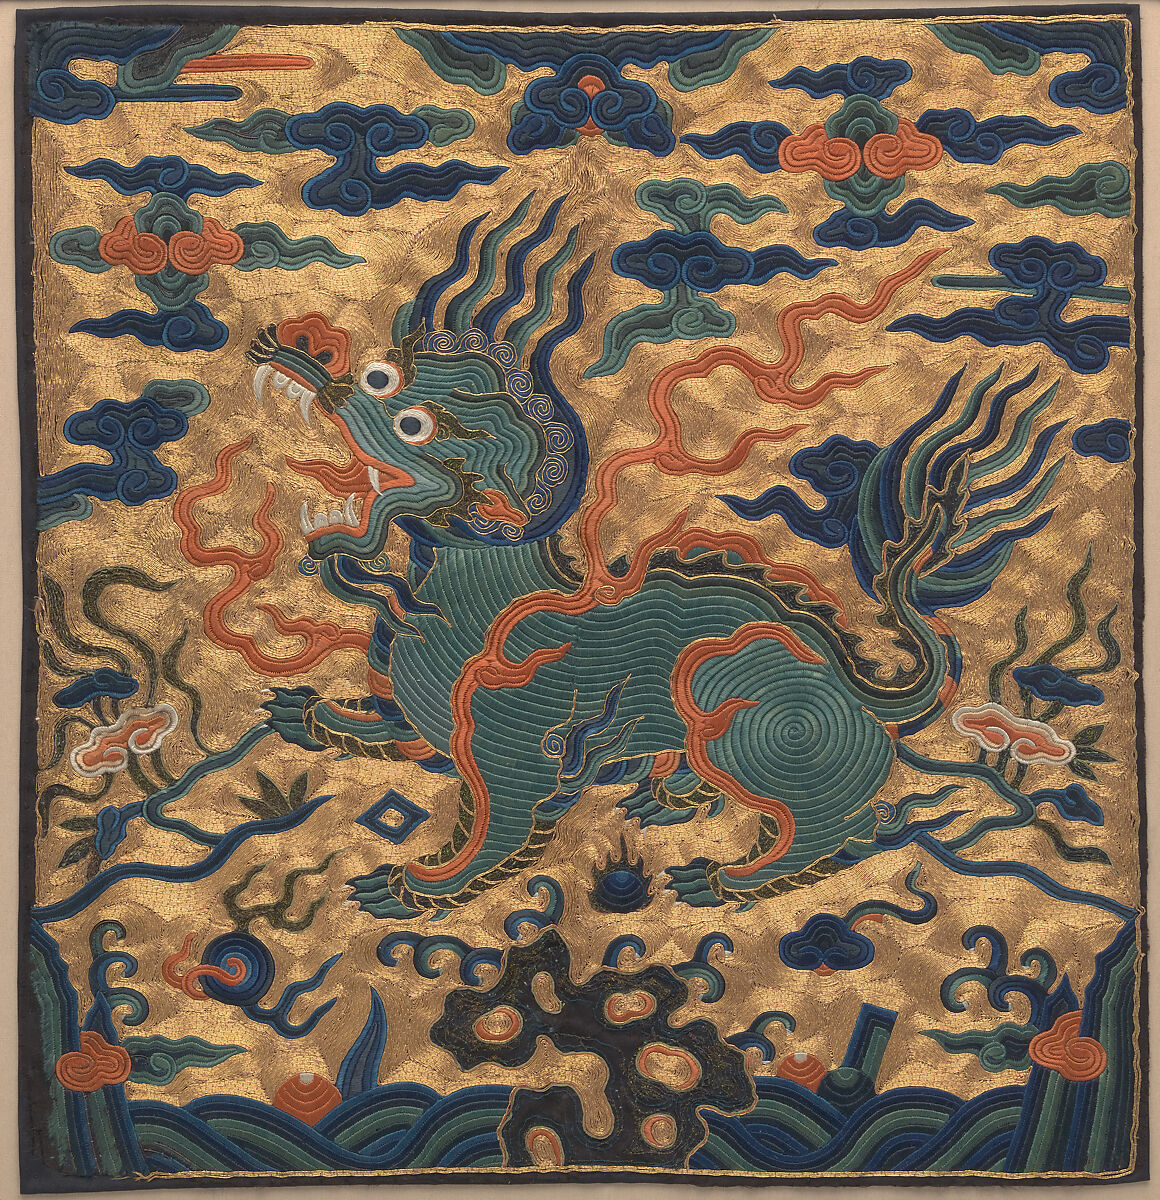 Rank Badge with Stylized Bear, Silk, feather, and metallic thread embroidery on silk satin, China 